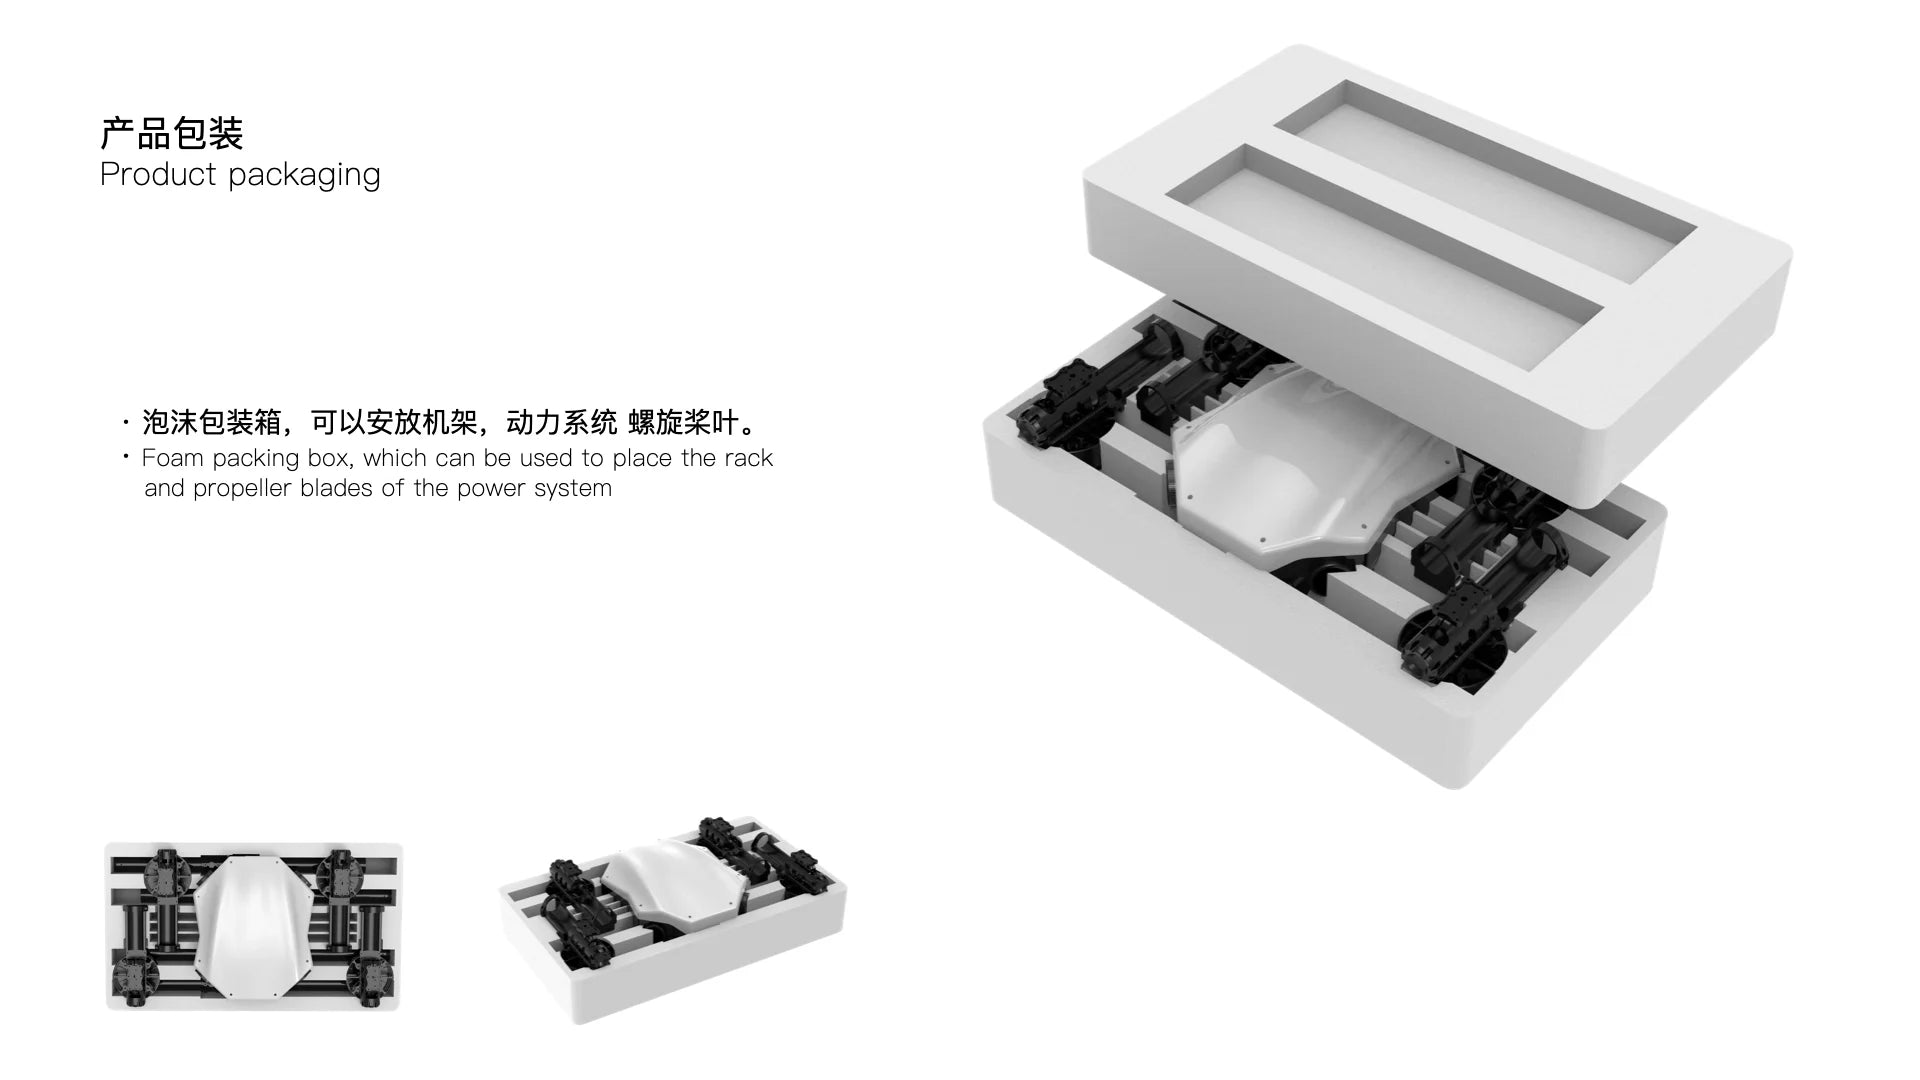 JIS EV422 22L Agriculture drone, ahRI #lrlto Foam packing box, which can be used to